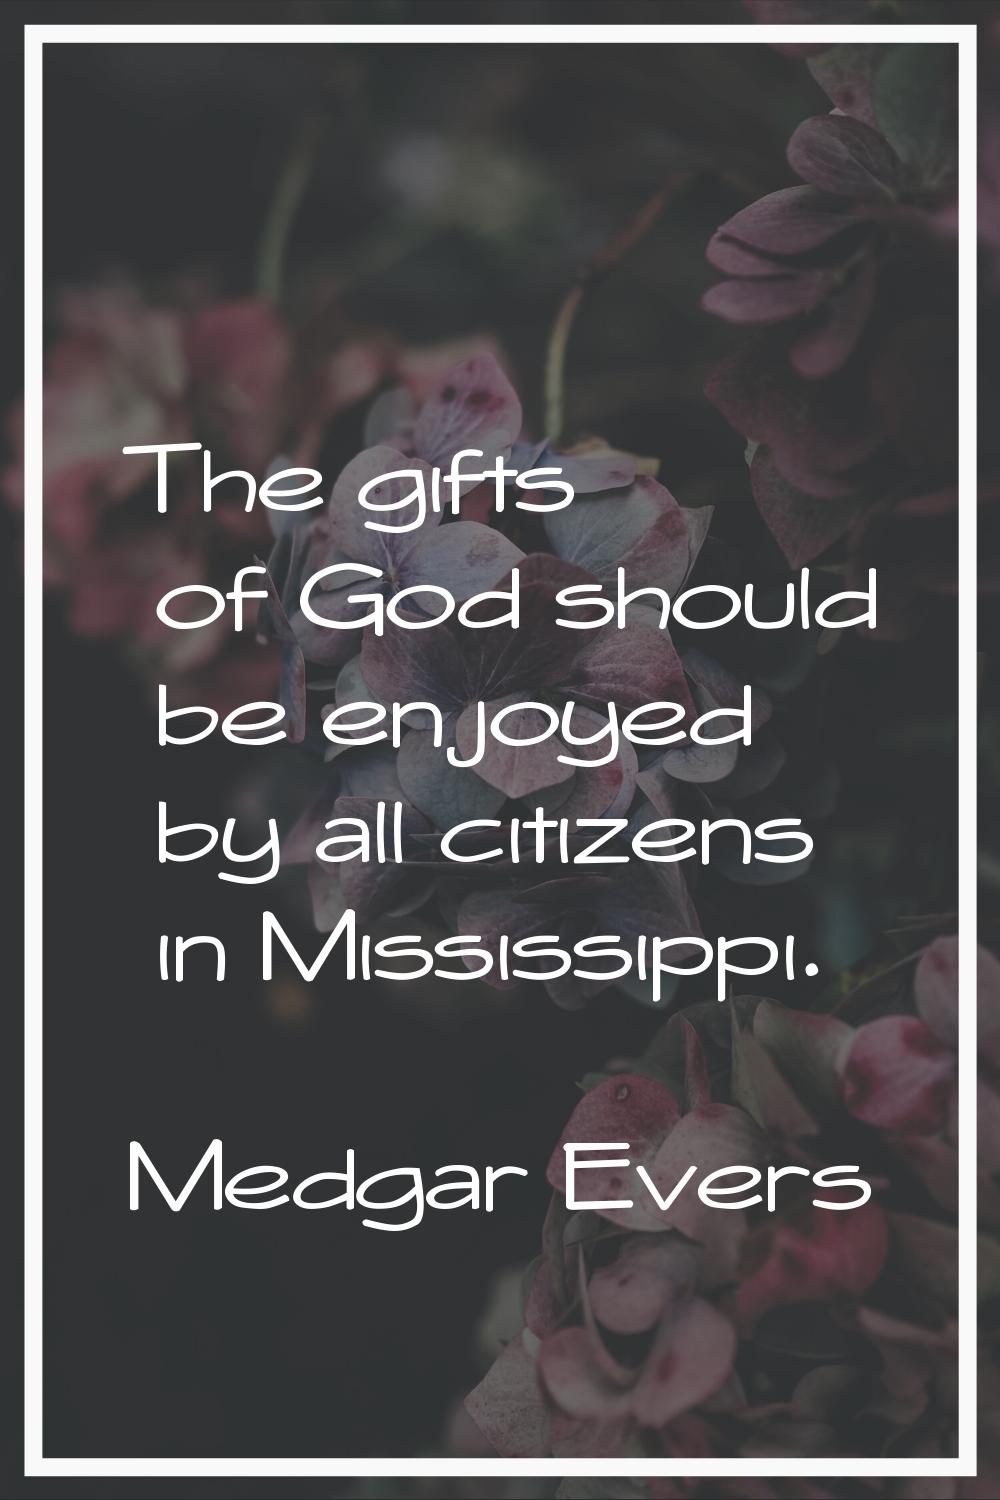 The gifts of God should be enjoyed by all citizens in Mississippi.